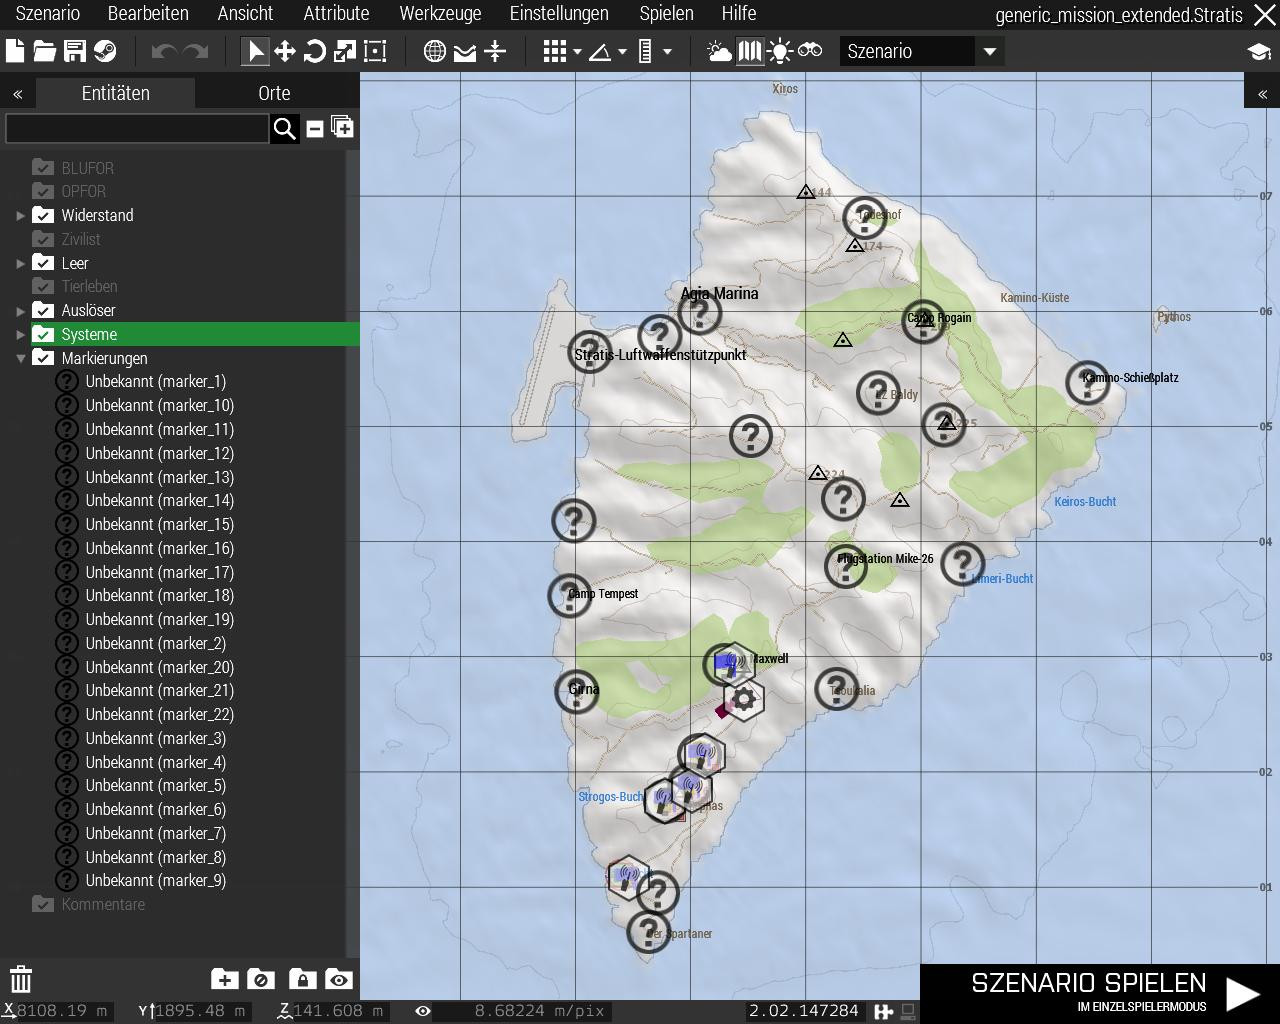 arma3 generic mission extended